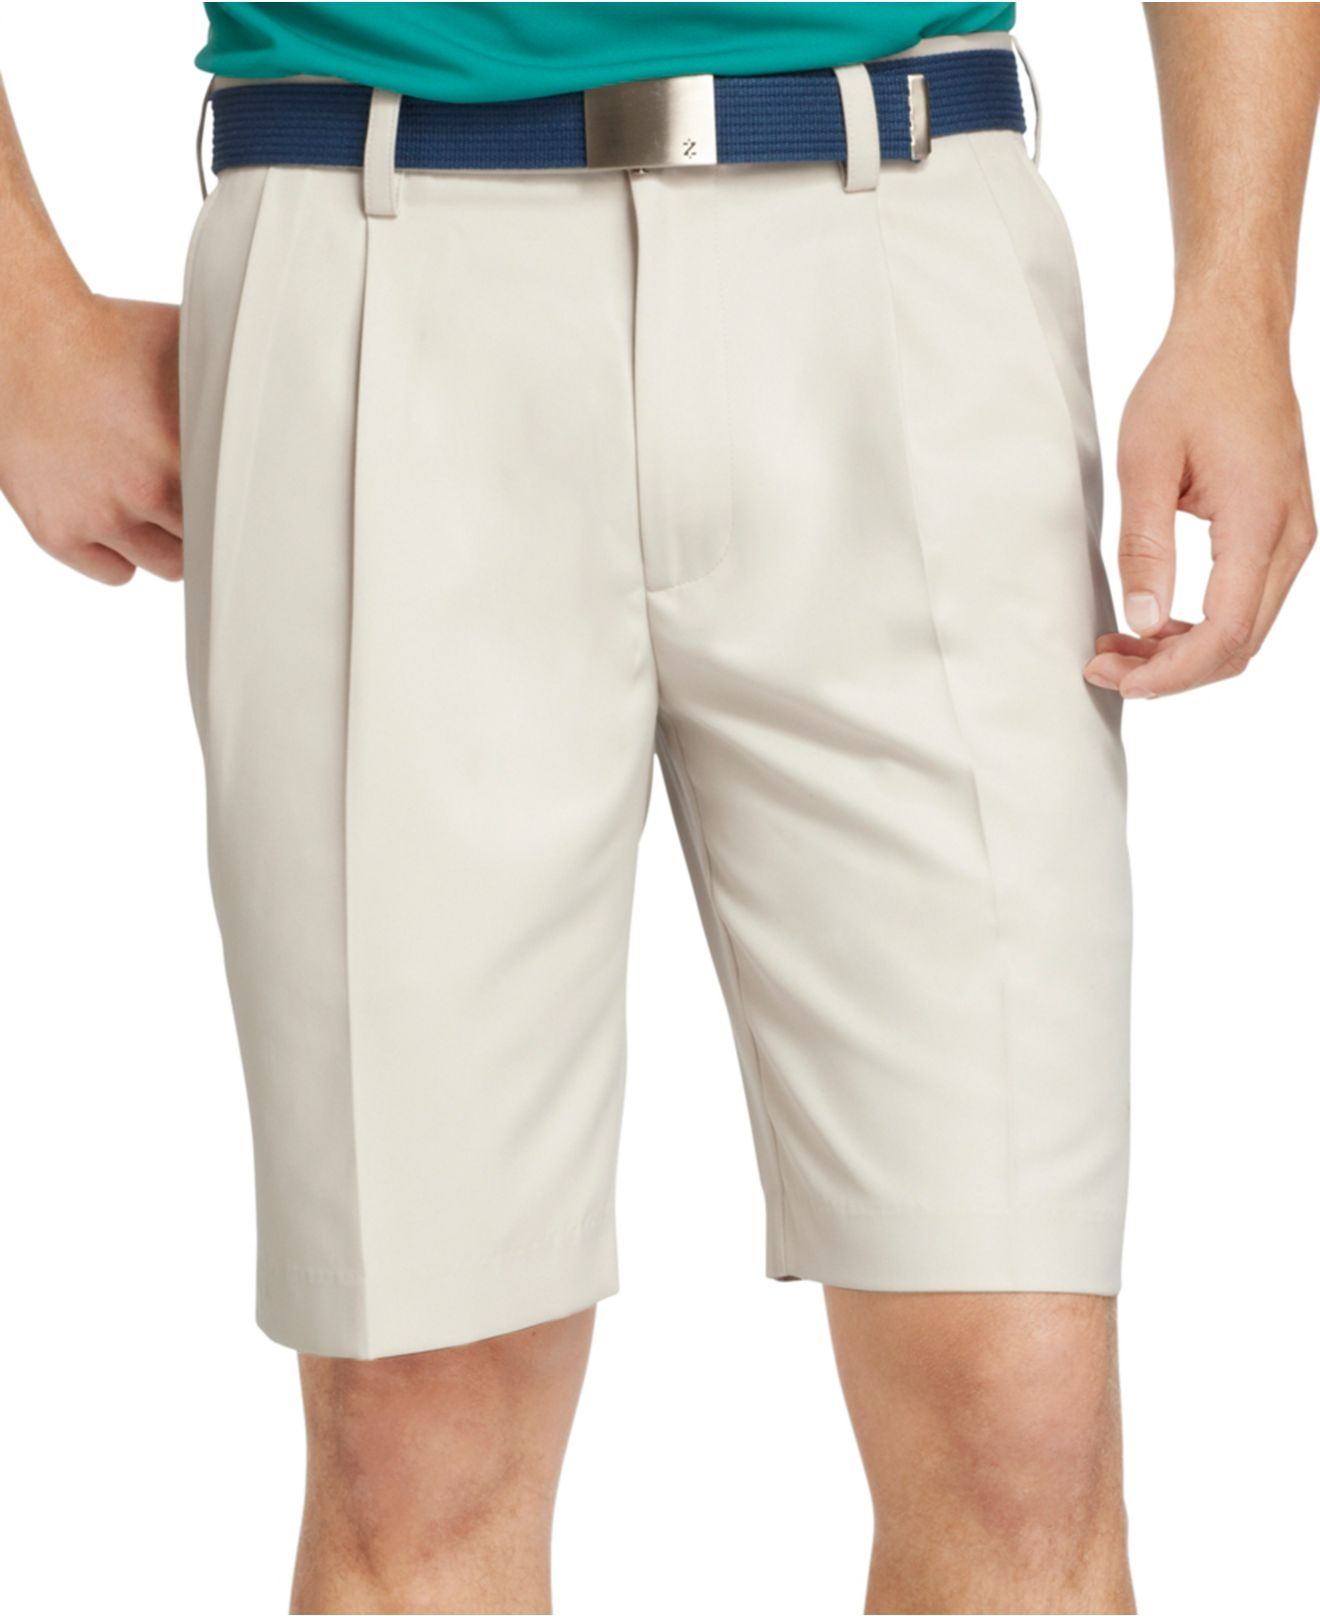 Lyst - Izod Double Pleat Lightweight Shorts in Natural for Men